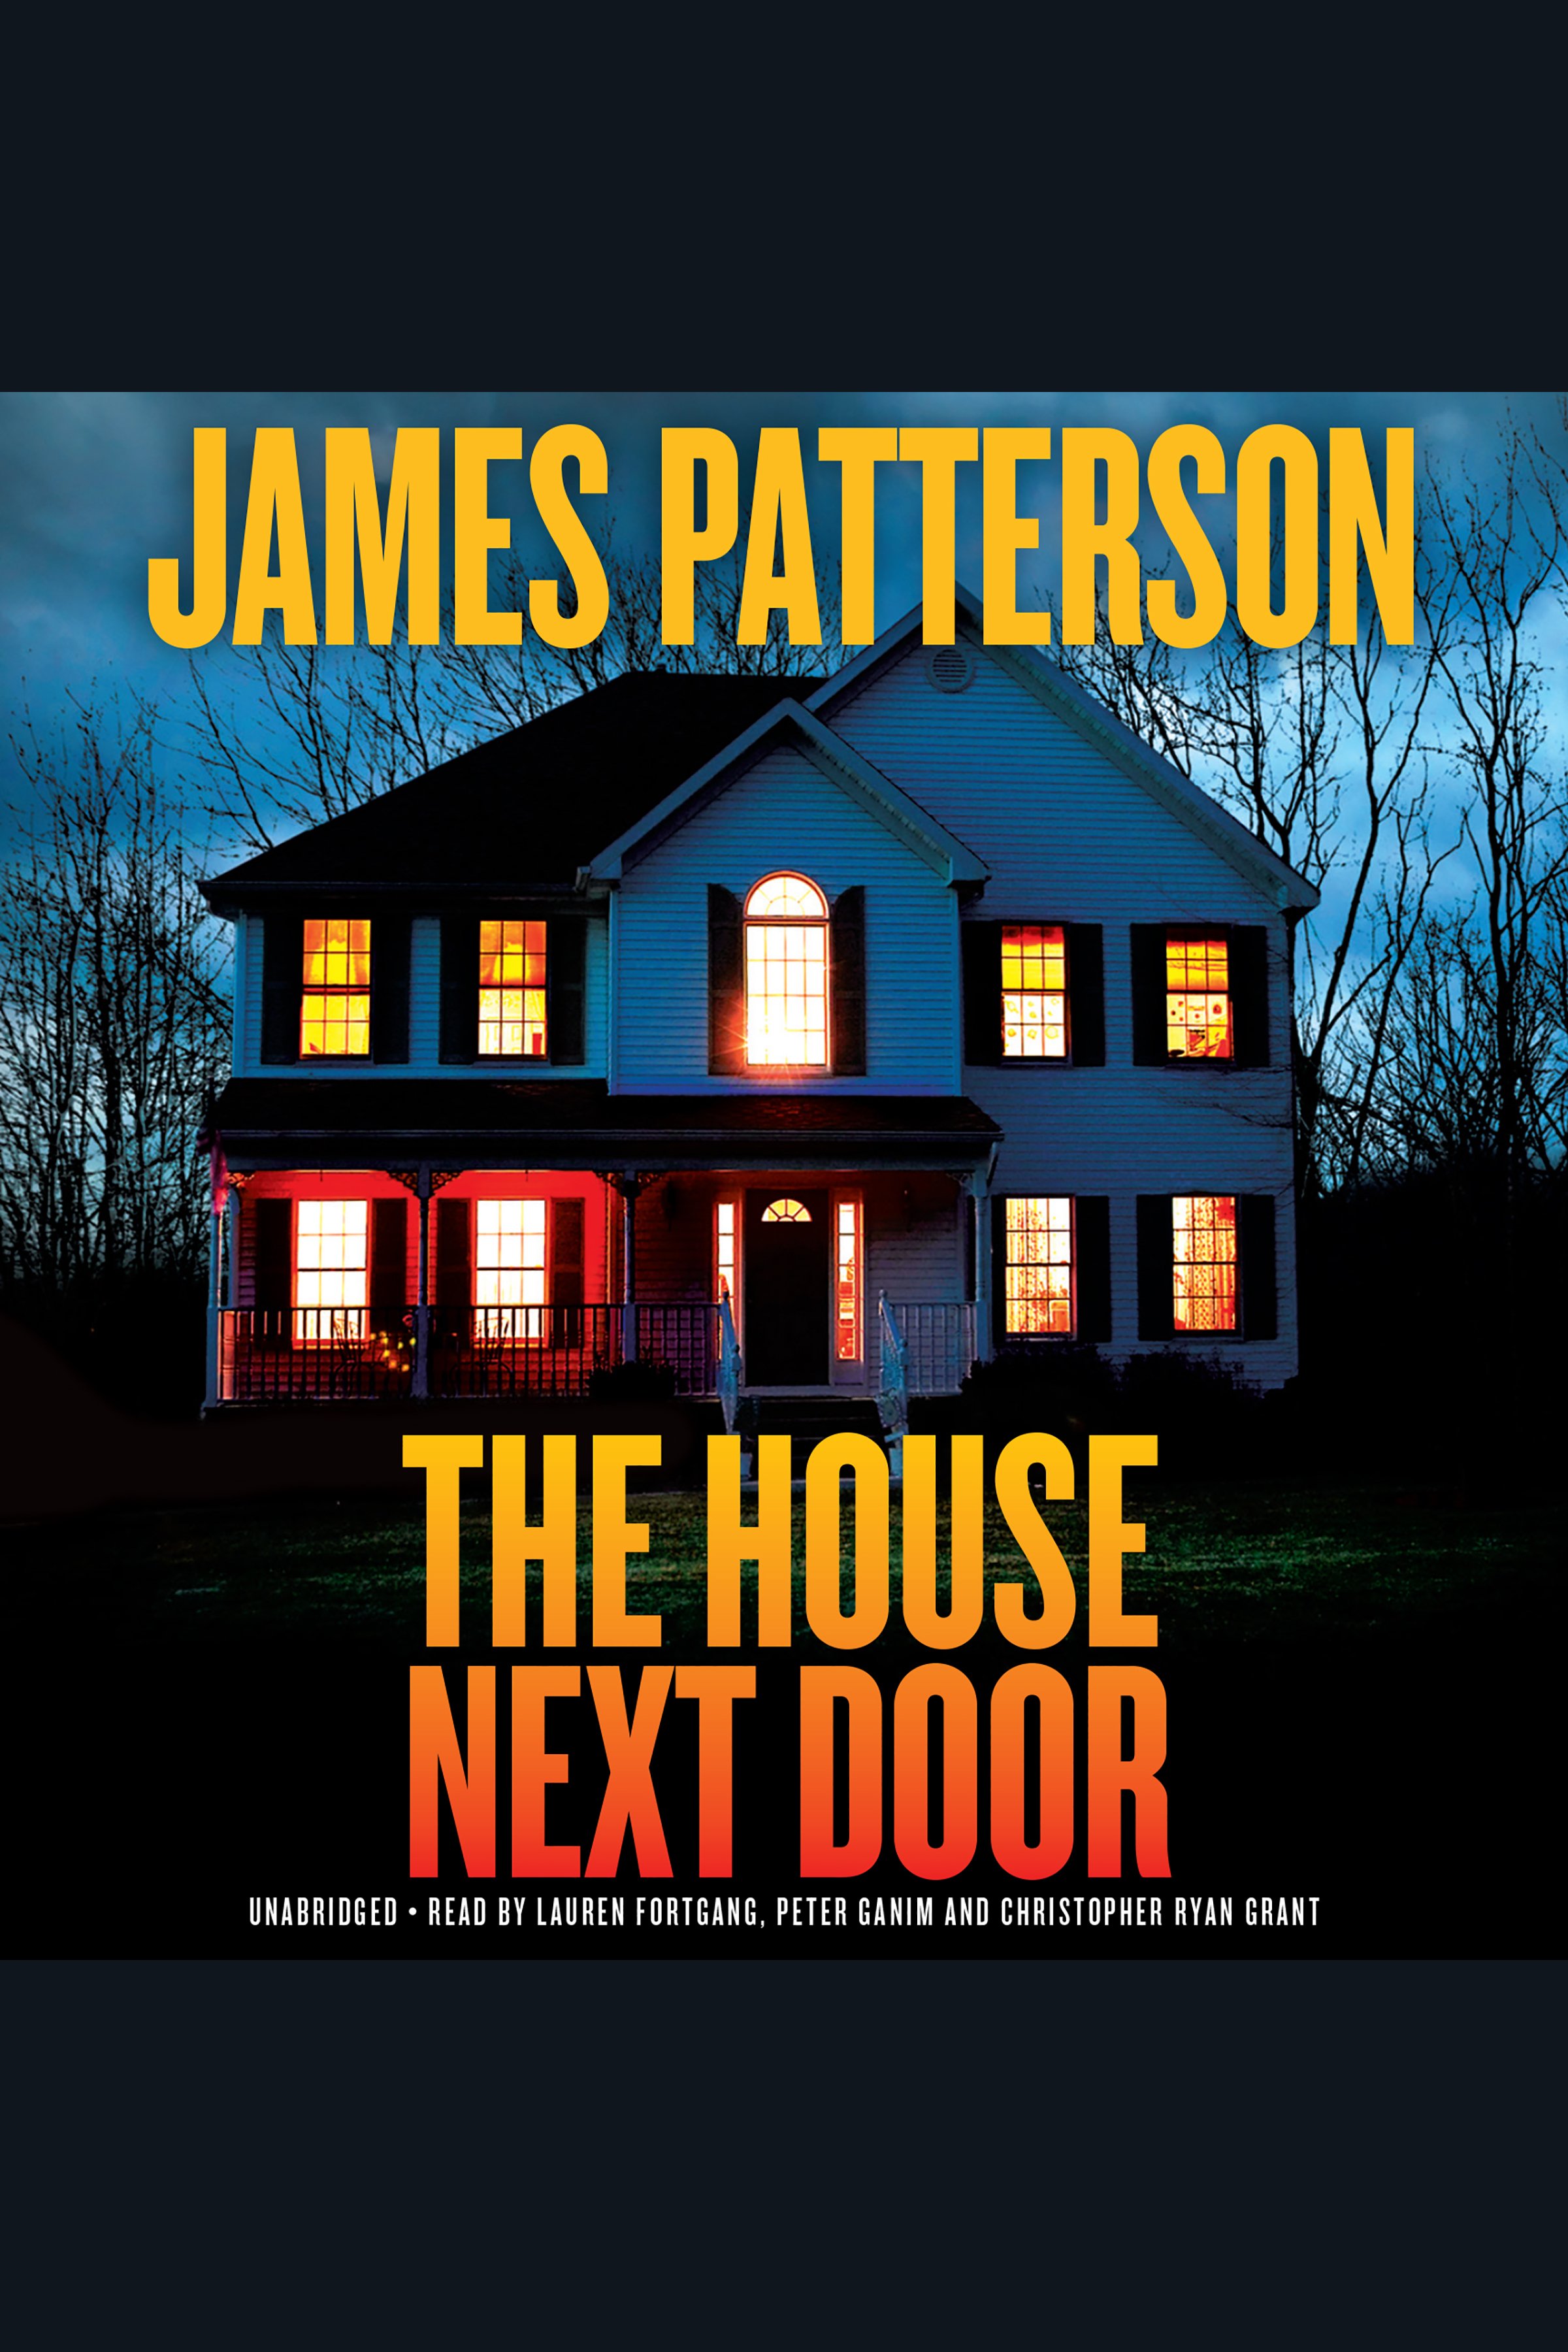 The house next door thrillers cover image